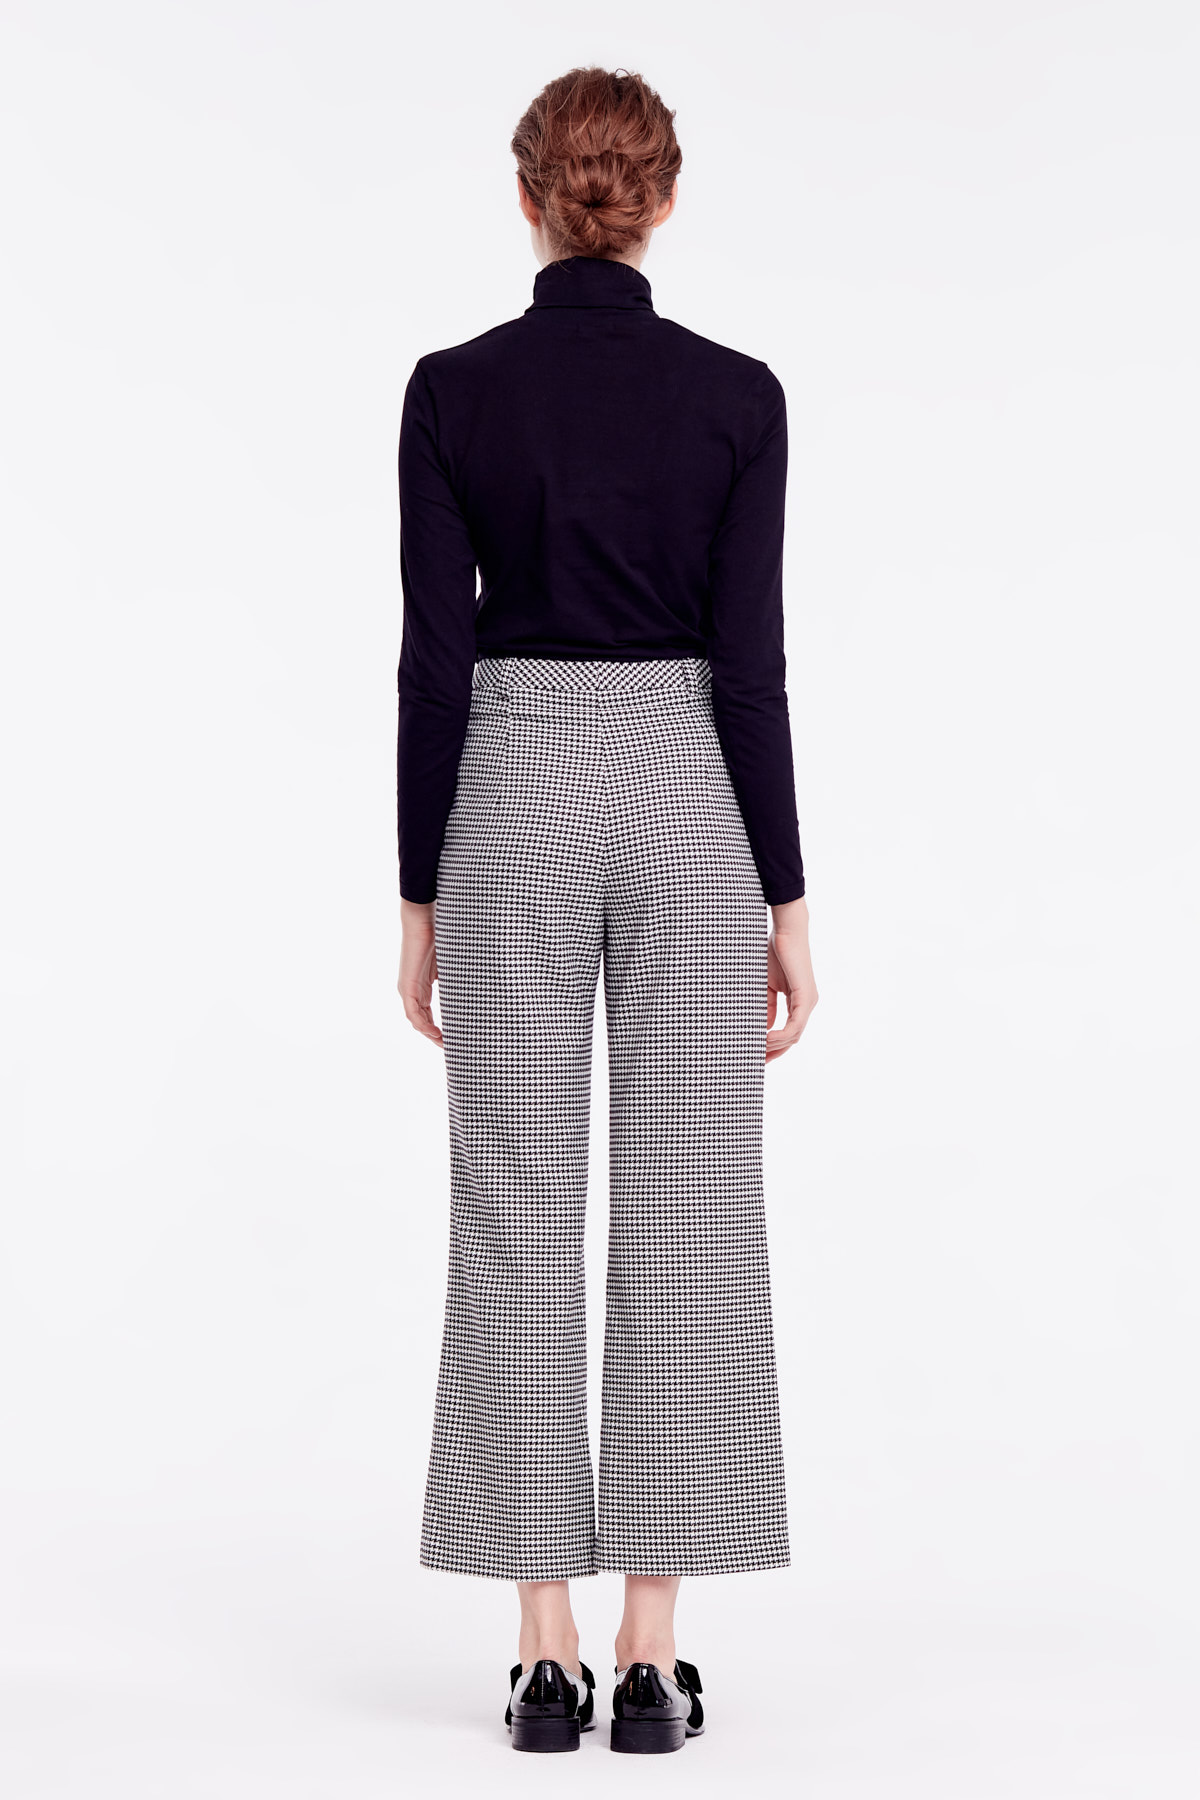 Cropped trousers with black-and-white houndstooth print, photo 5